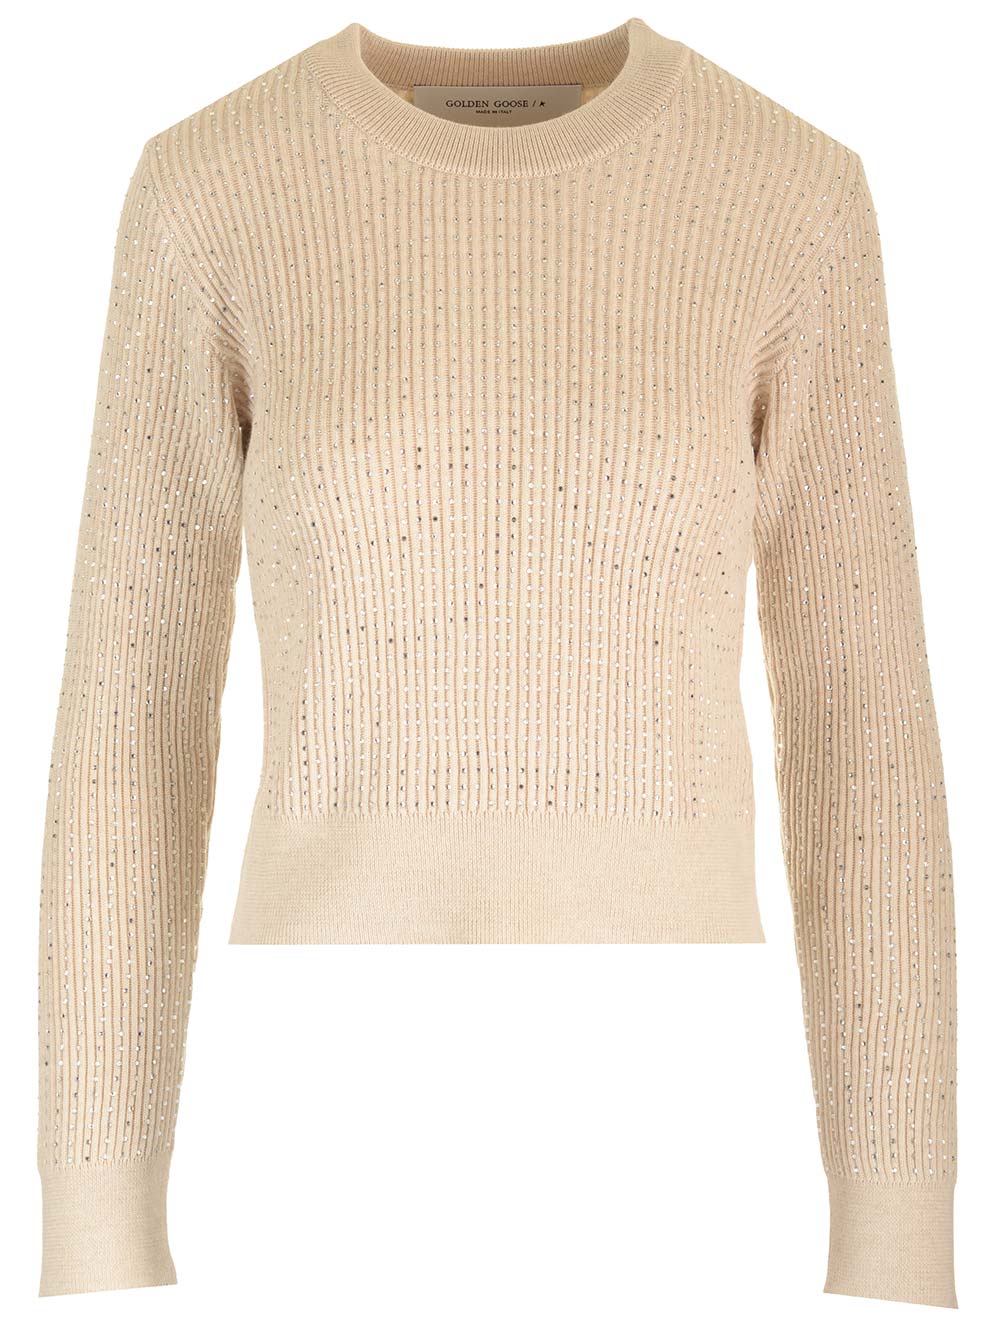 GOLDEN GOOSE RIBBED WOOL SWEATER